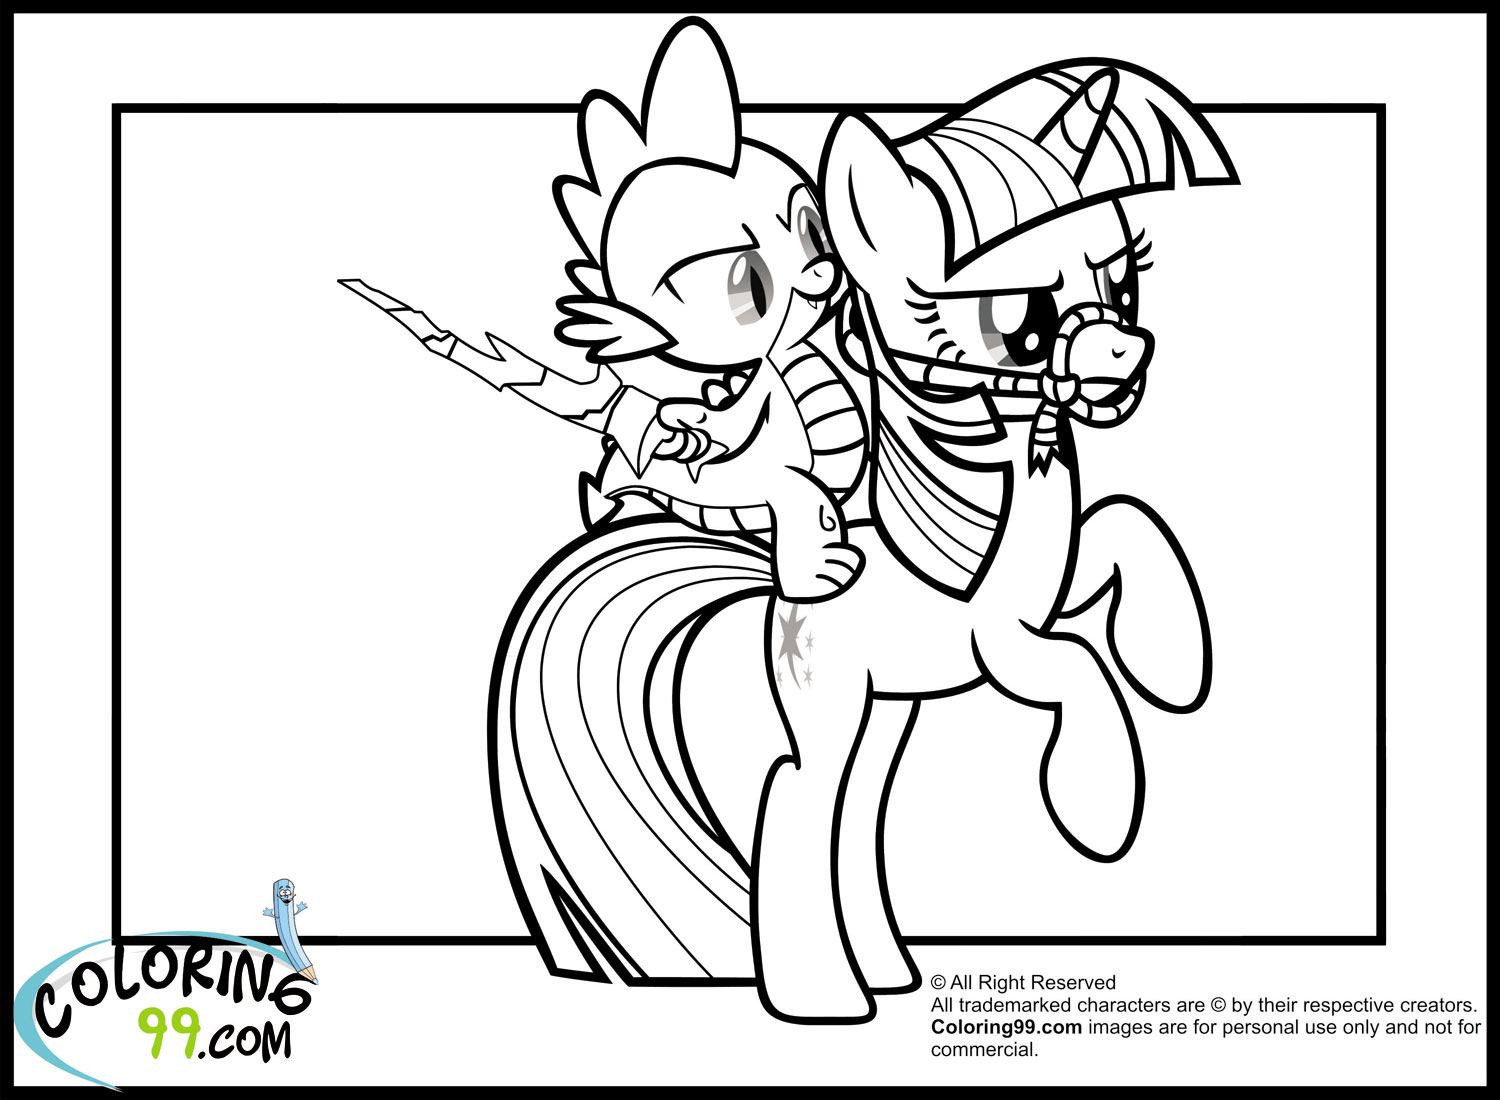 Twilight Sparkle from My Little Pony Coloring Page